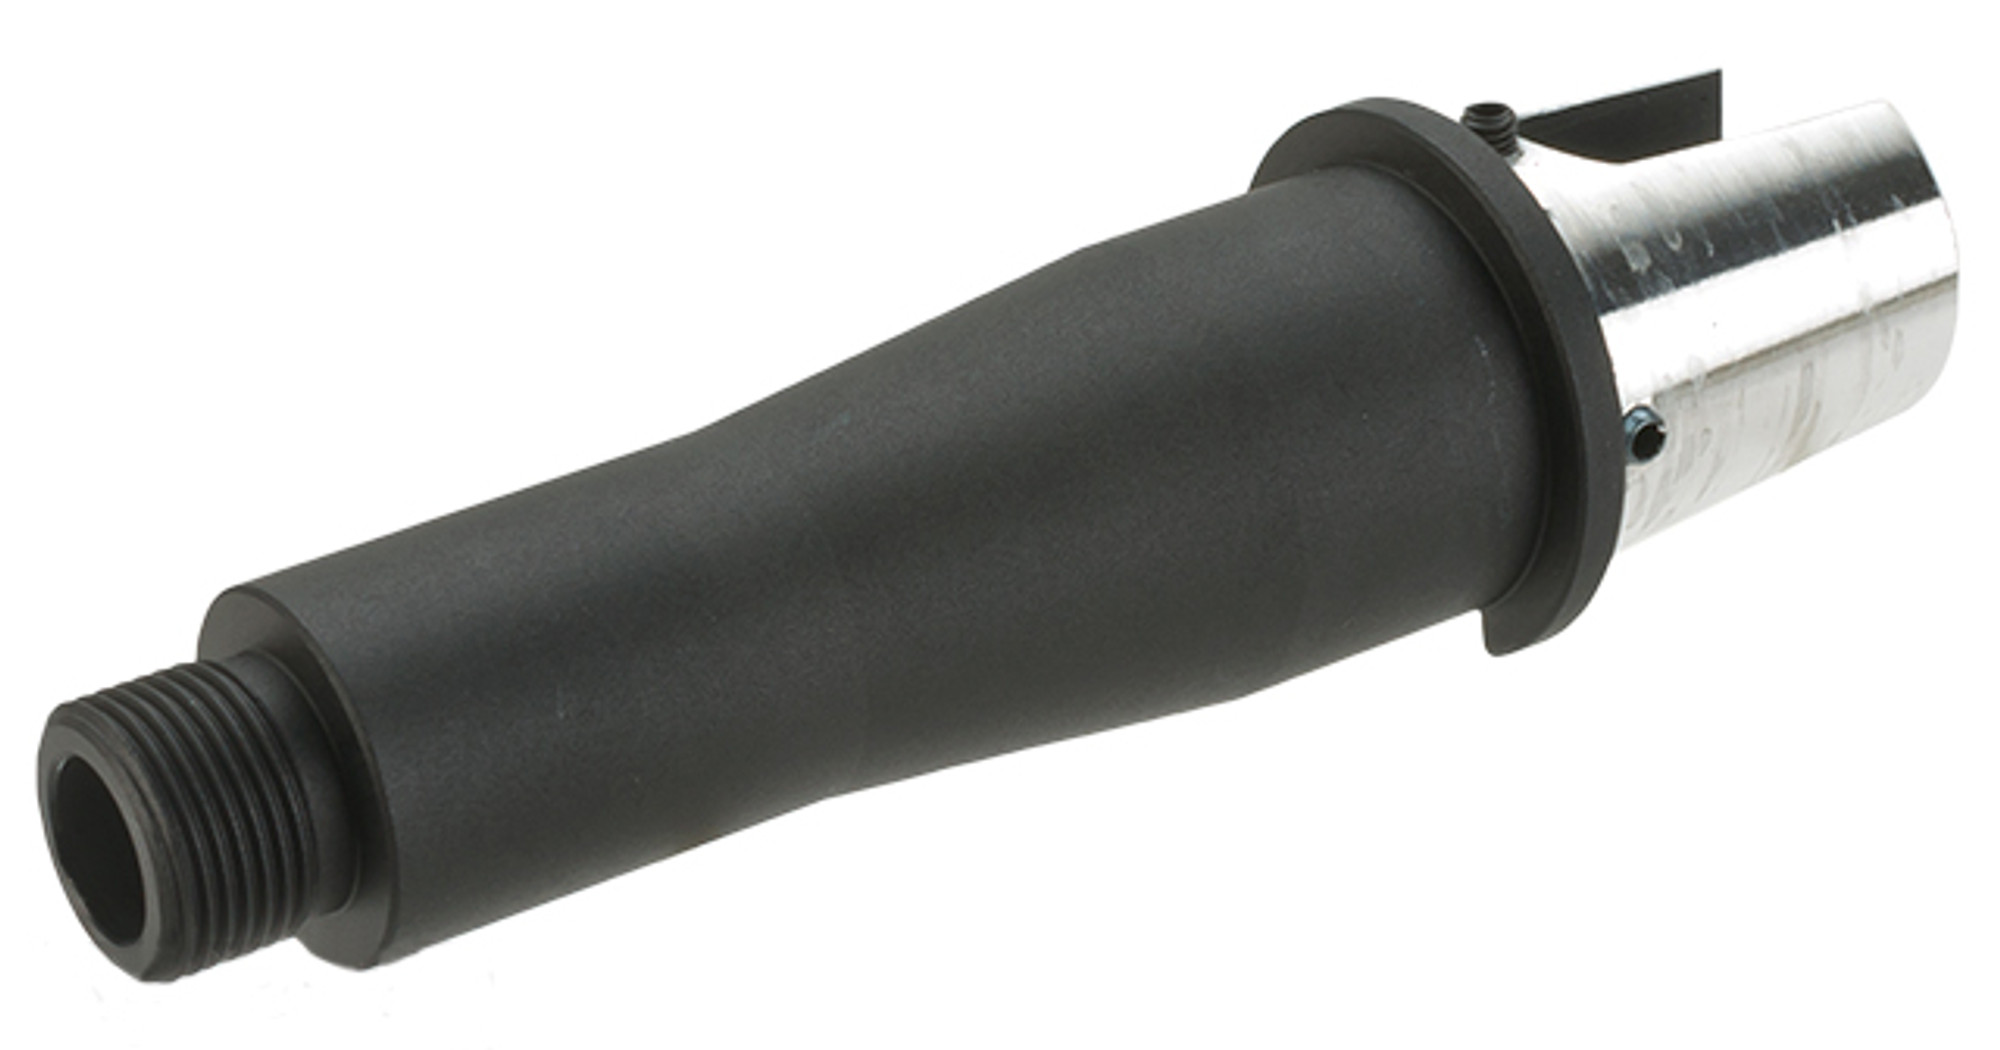 G&P Tapered 4" Fighting Cat Length CNC Aluminum GP-T Outer Barrel for G&P GP-T AEG Receivers